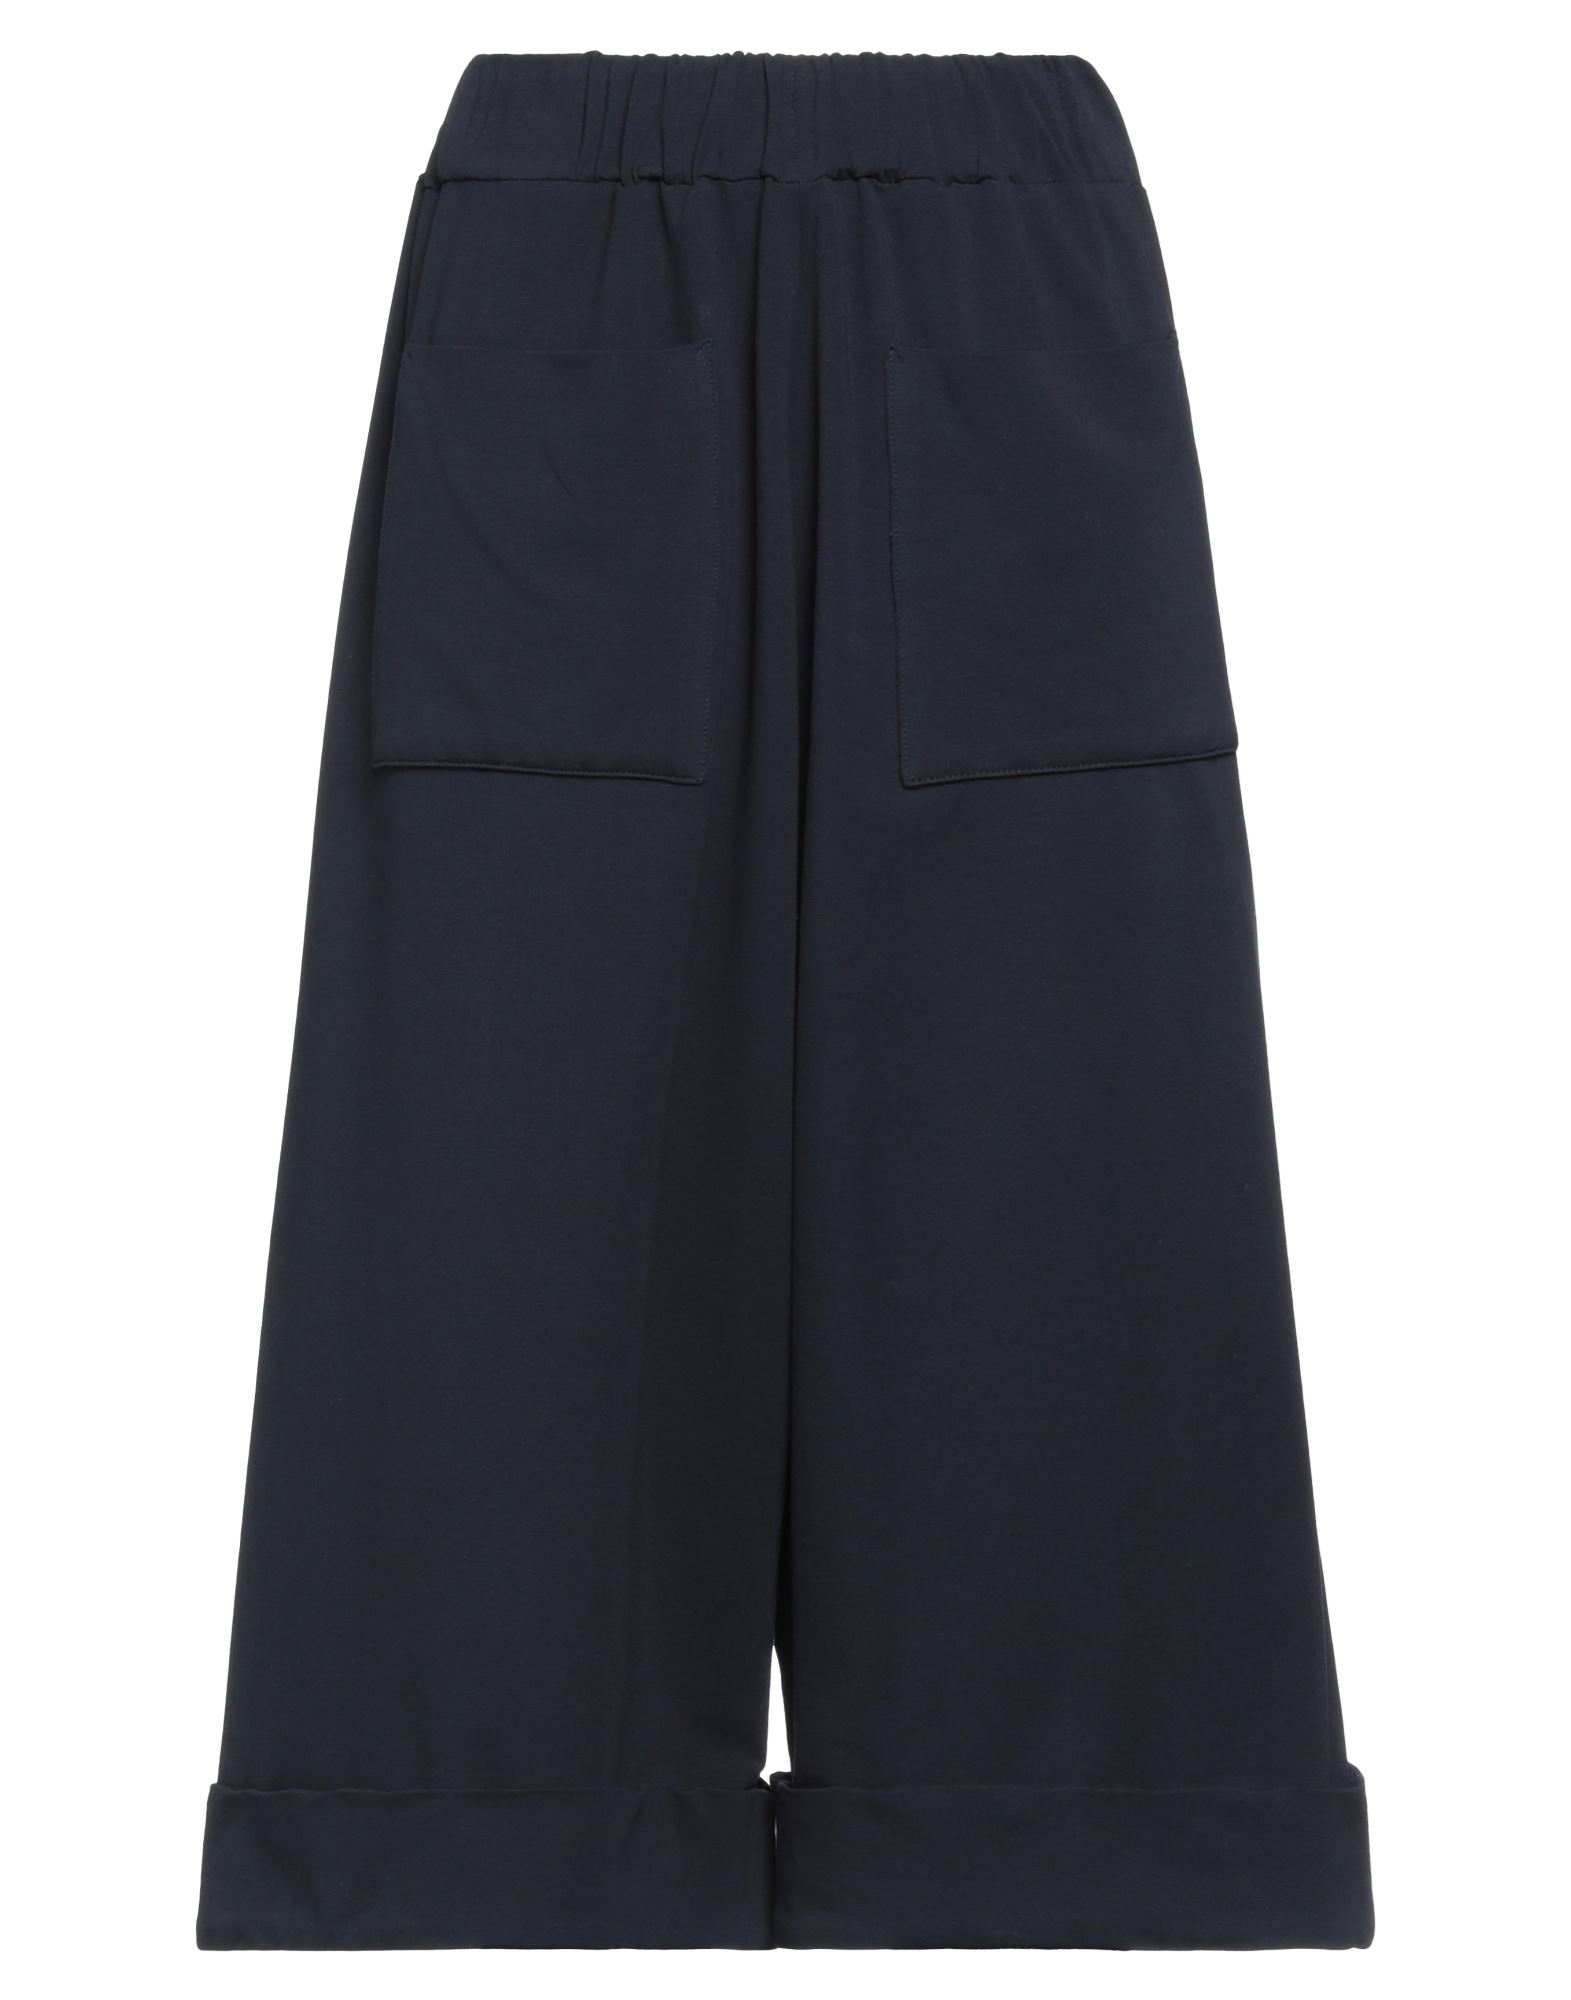 ALESSIO BARDELLE Cropped Pants